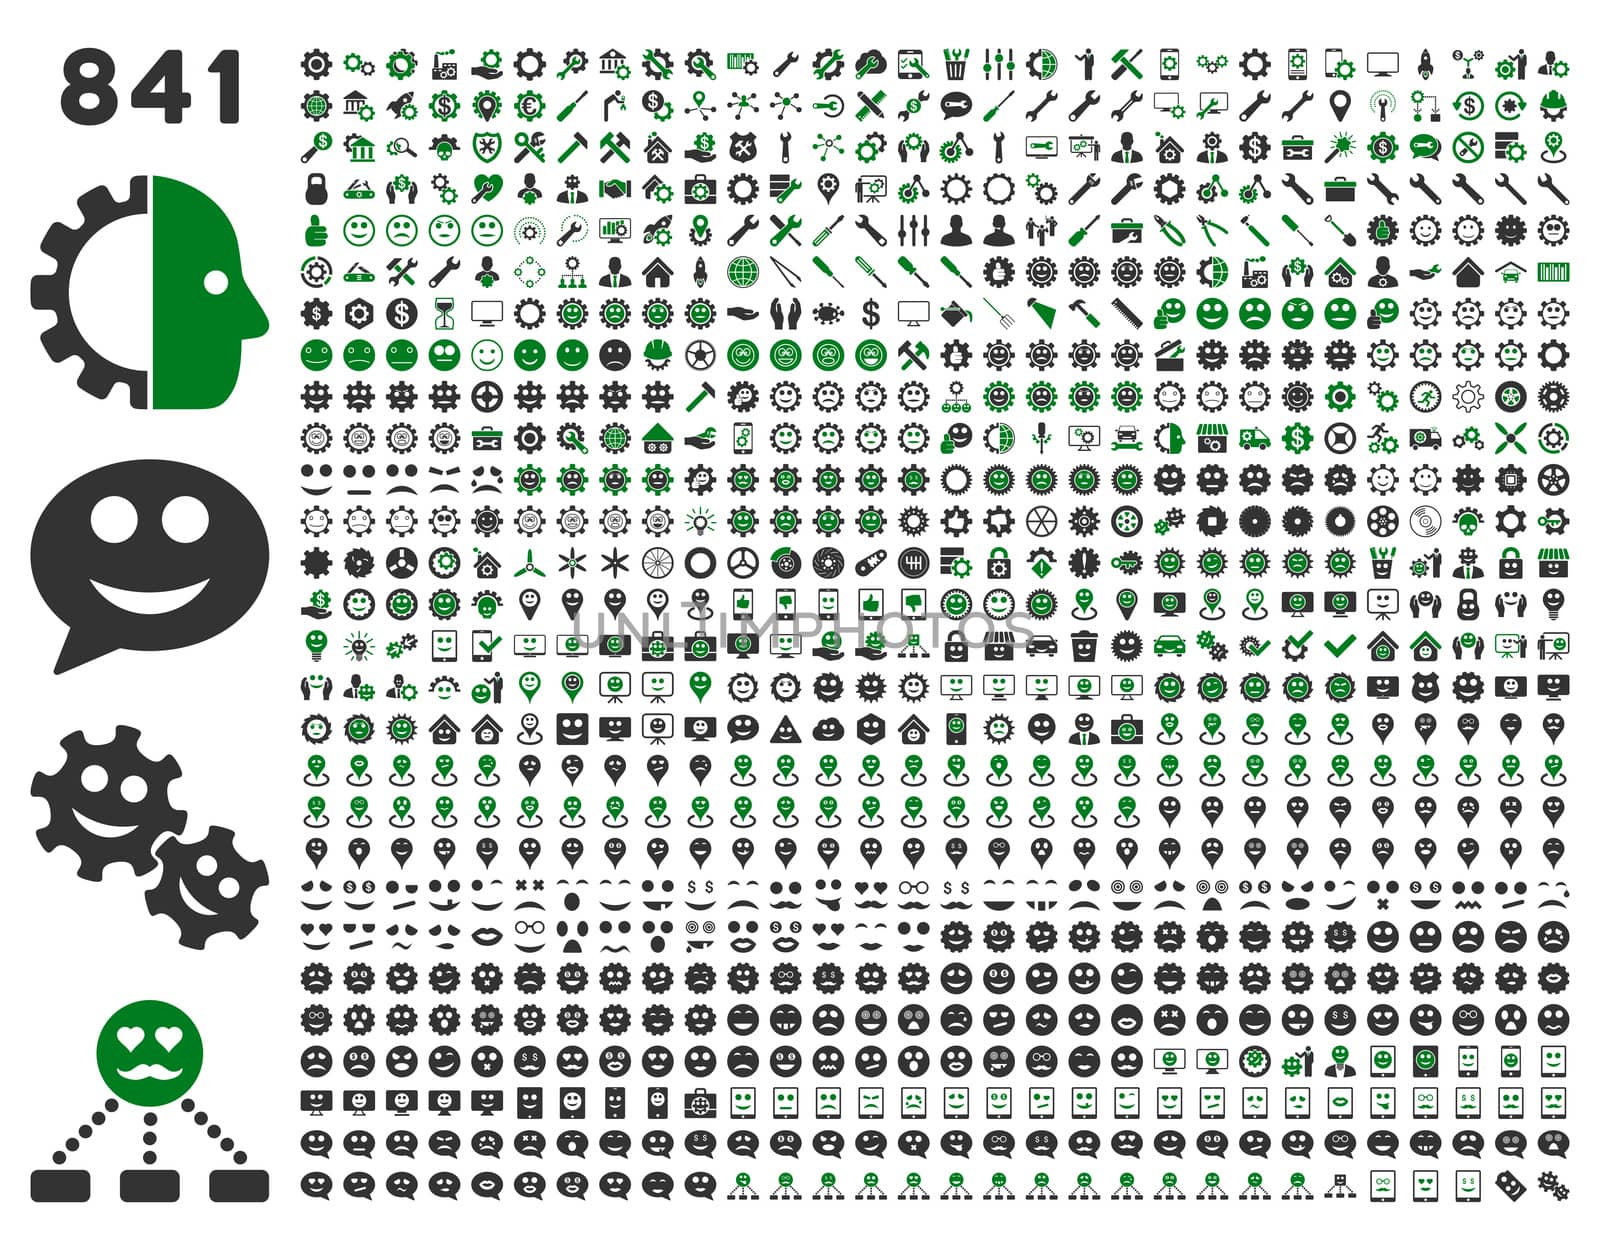 841 smile, tool, gear, map markers, mobile icons. Glyph set style: bicolor flat images, green and gray symbols, isolated on a white background.